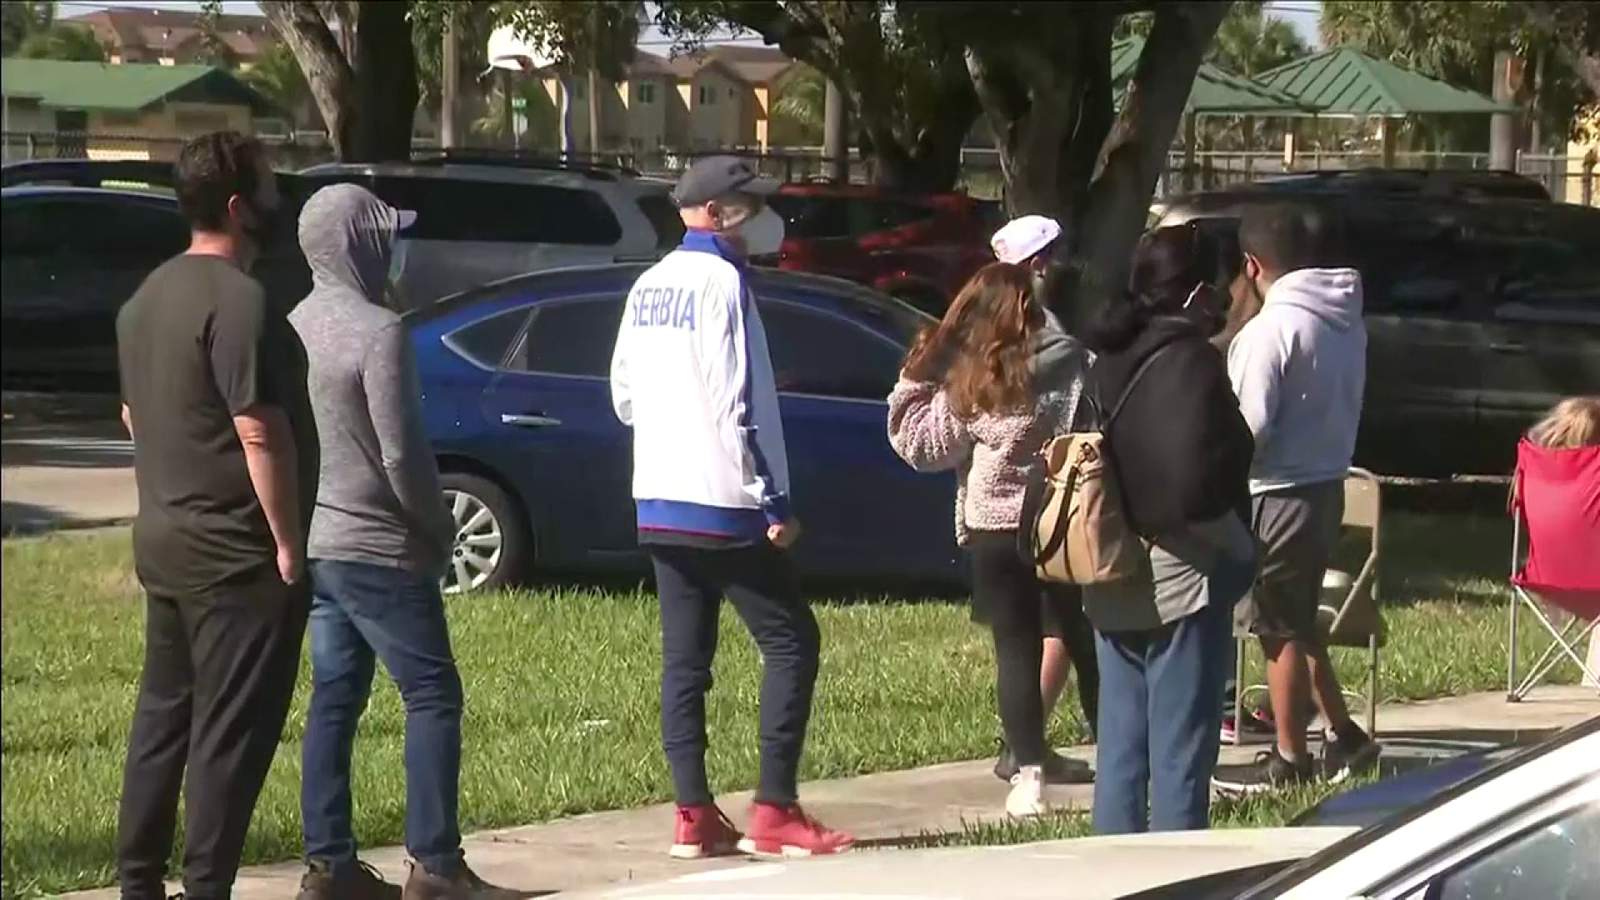 Anyone 18 or older who showed up at Florida City FEMA site given COVID-19 shot, even non-eligible